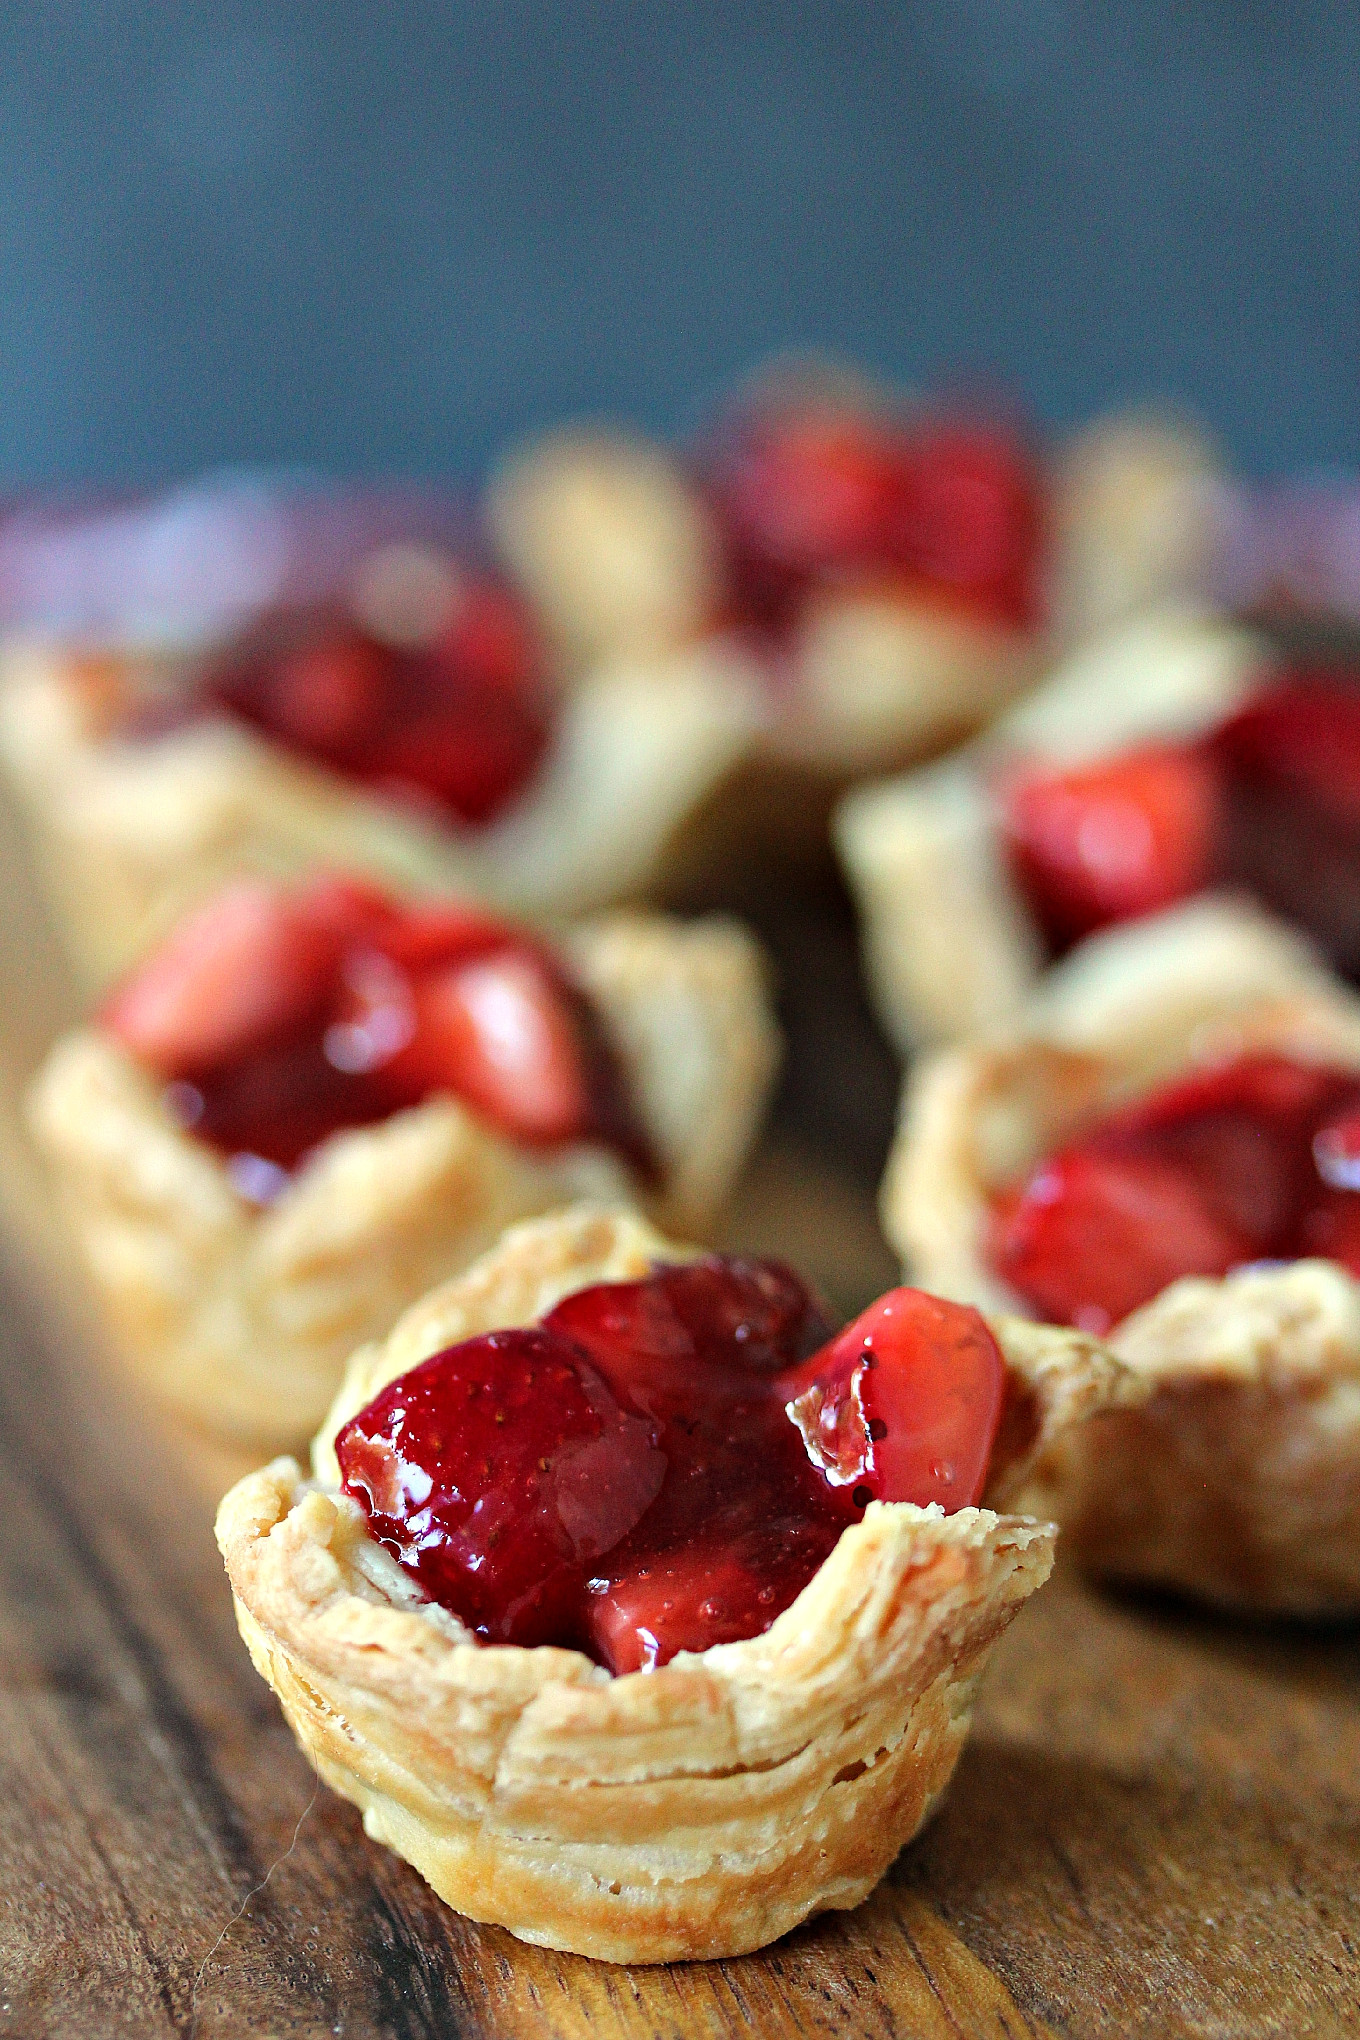 Puffed Pastry Recipes Desserts
 Strawberry Filled Mini Puff Pastries